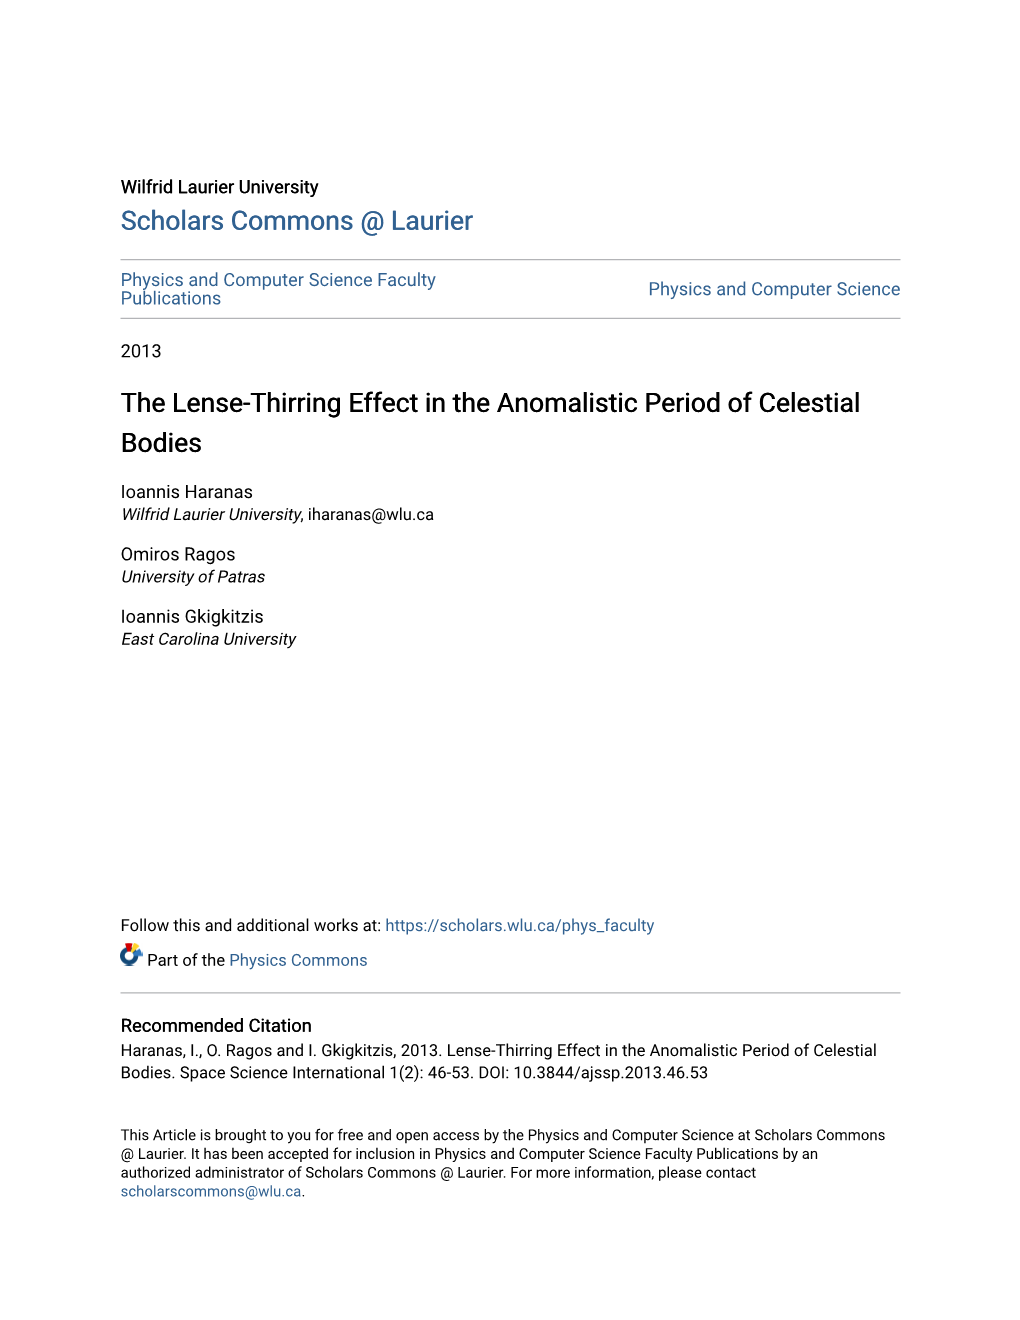 The Lense-Thirring Effect in the Anomalistic Period of Celestial Bodies